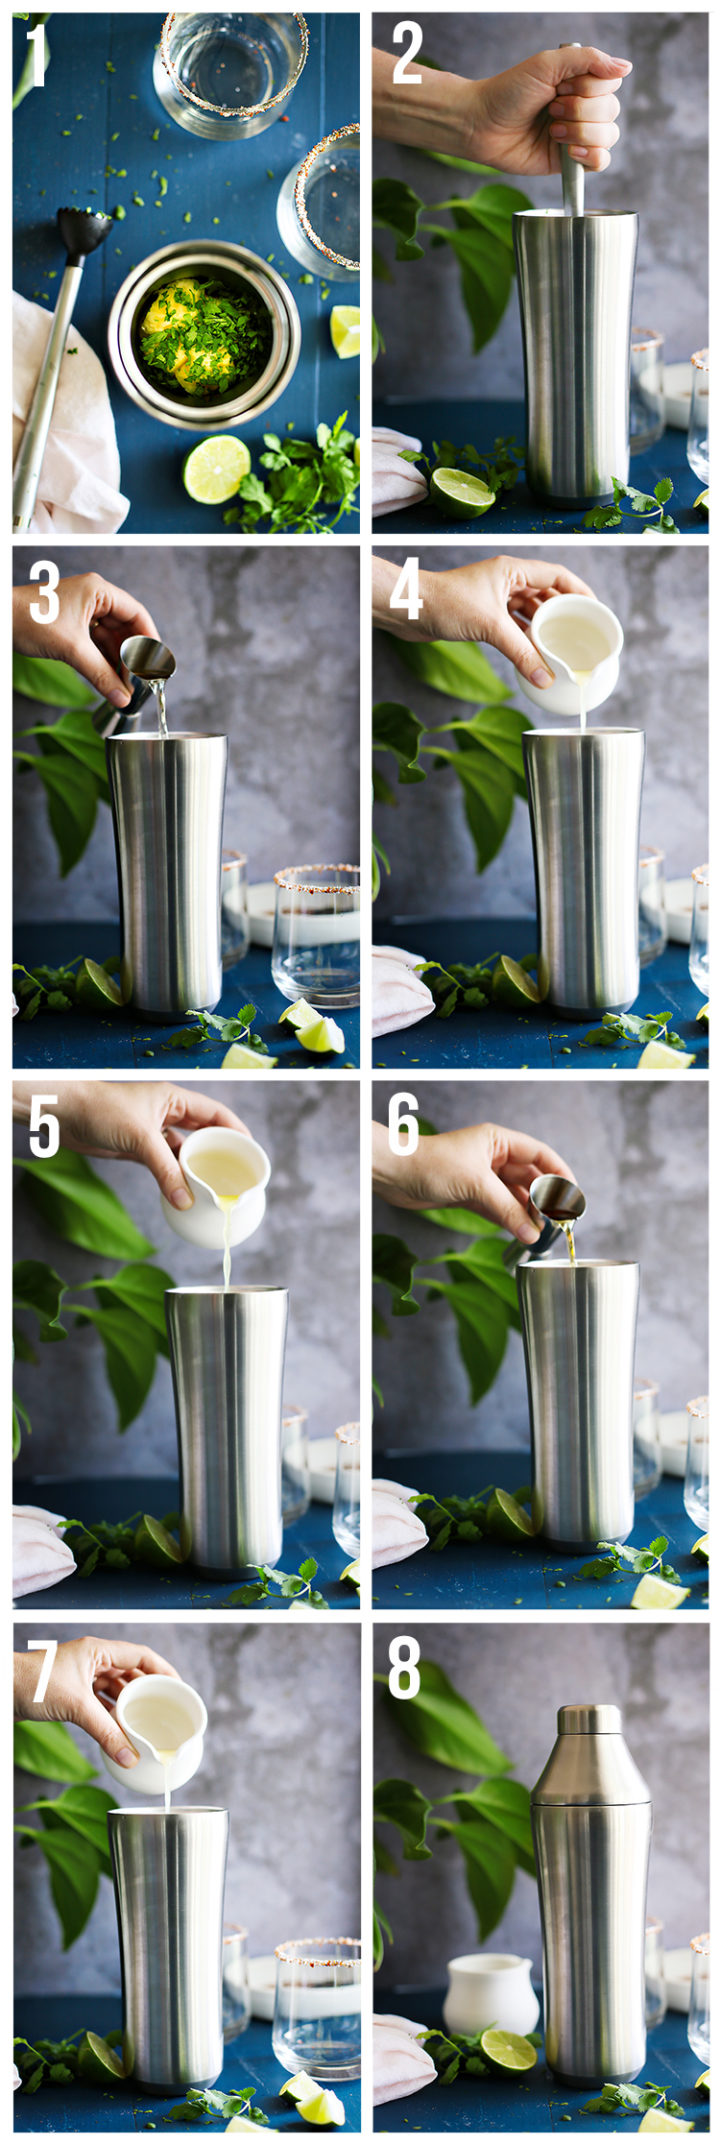 step by step photos showing how to make a pineapple margarita